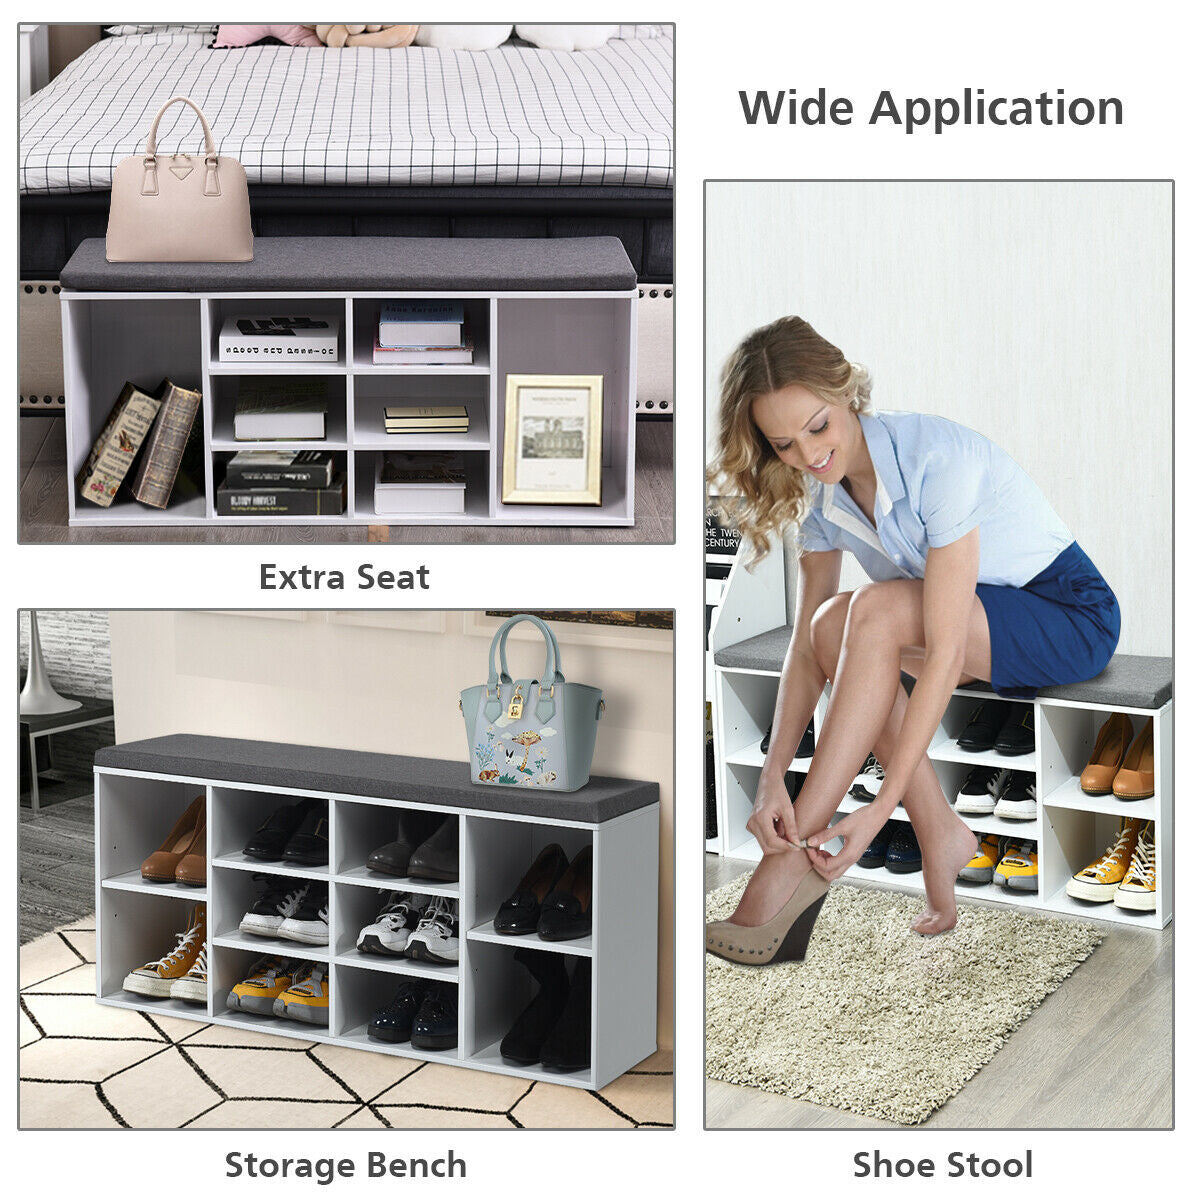 Wide Application of Modern Style: The modern style of this storage cabinet allows for versatile use, not only as a shoe rack in the hallway but also as an extra storage bench in the living room or a bed stool in the bedroom.